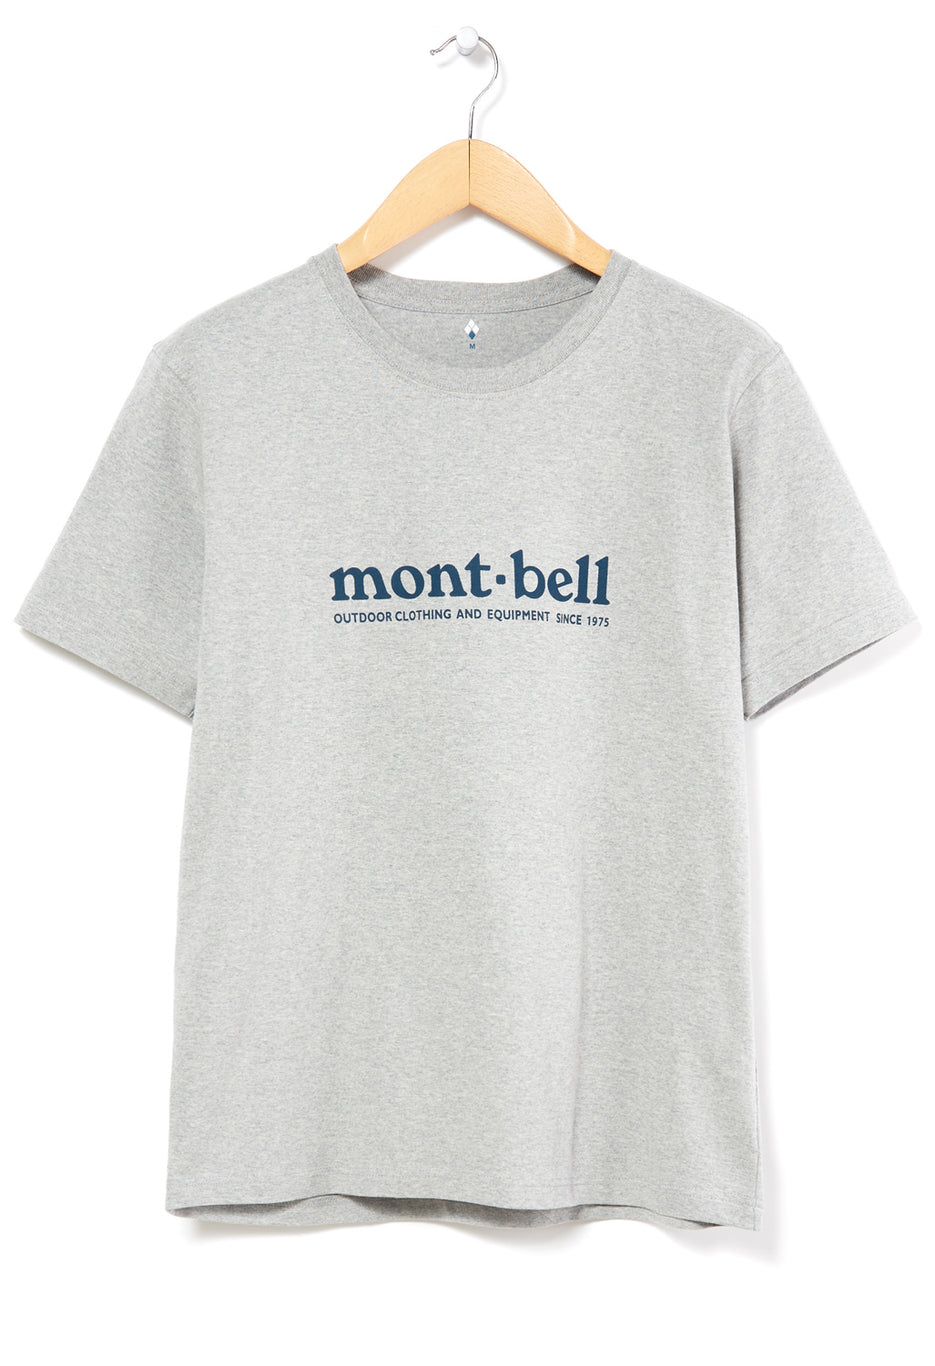 Montbell Pear Skin Cotton mont-bell T-Shirt 1